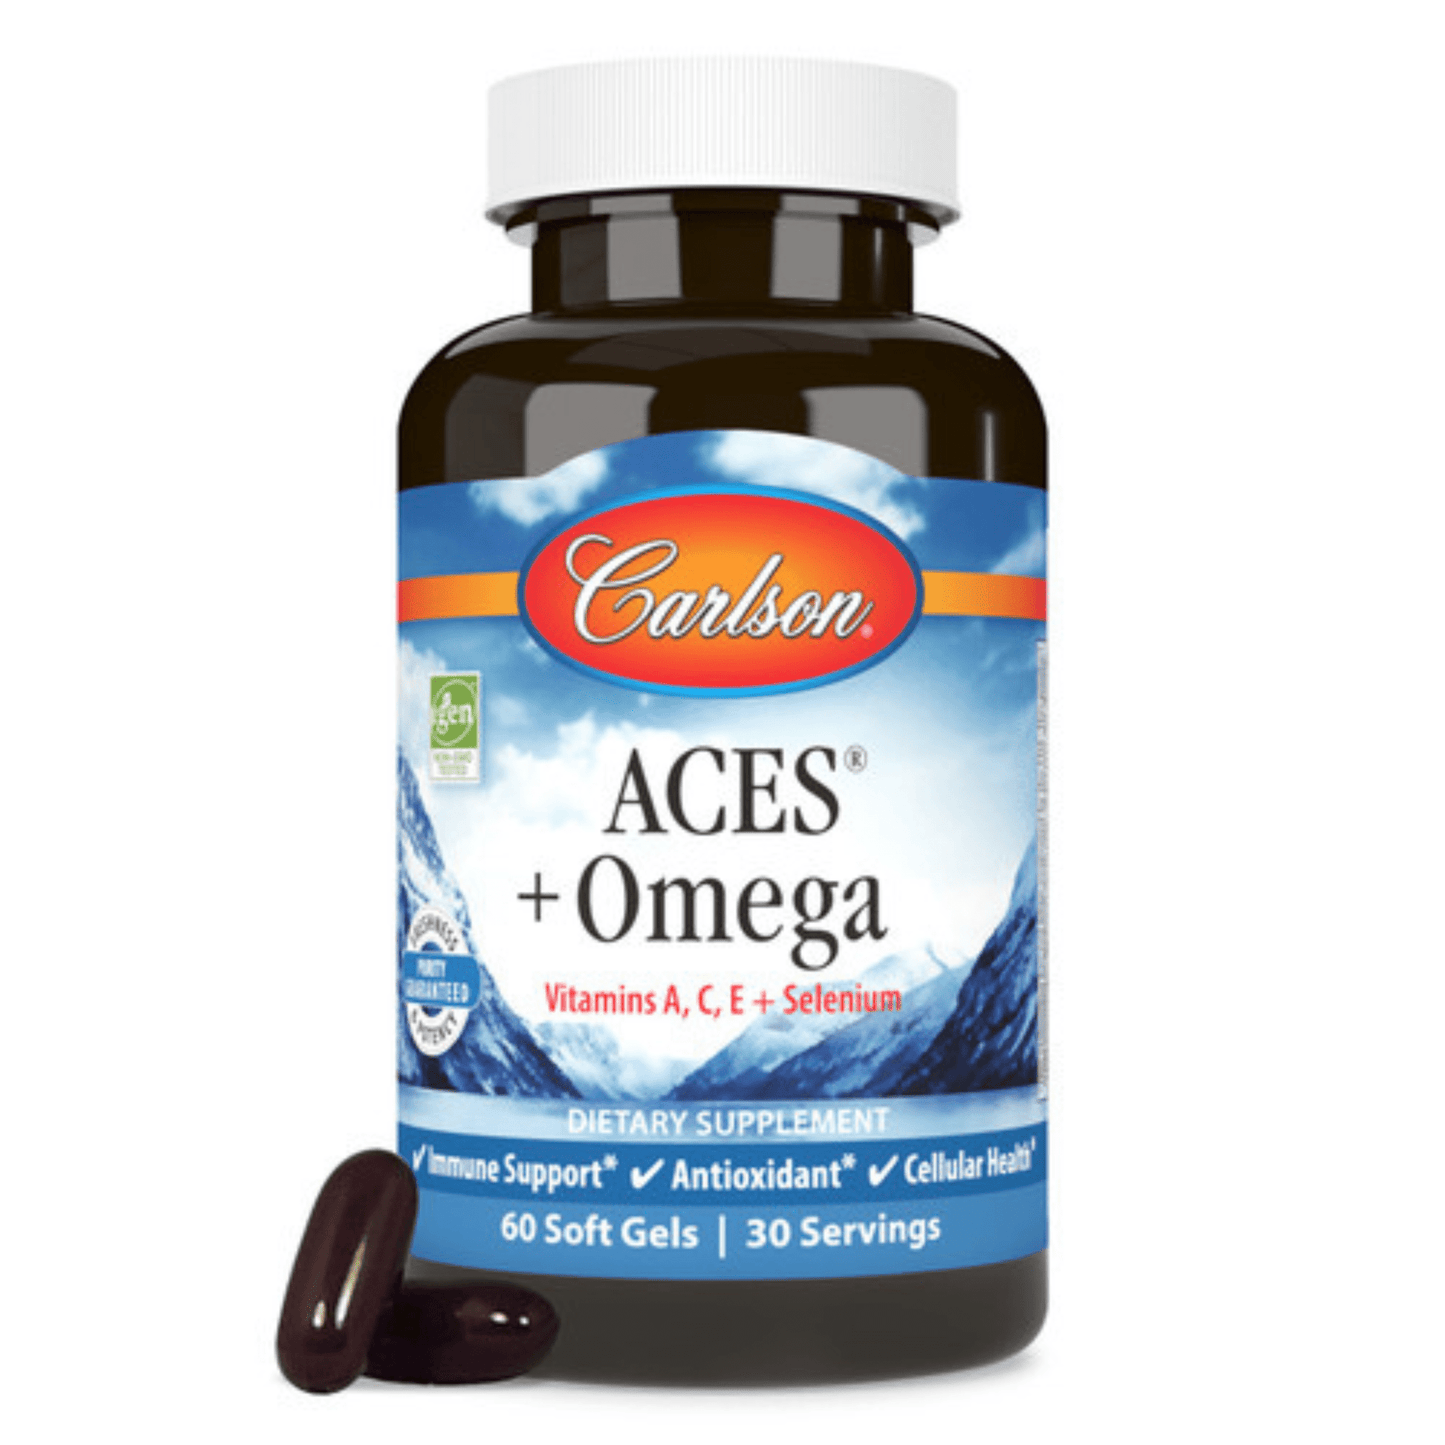 Primary Image of ACES + Omega Soft Gels